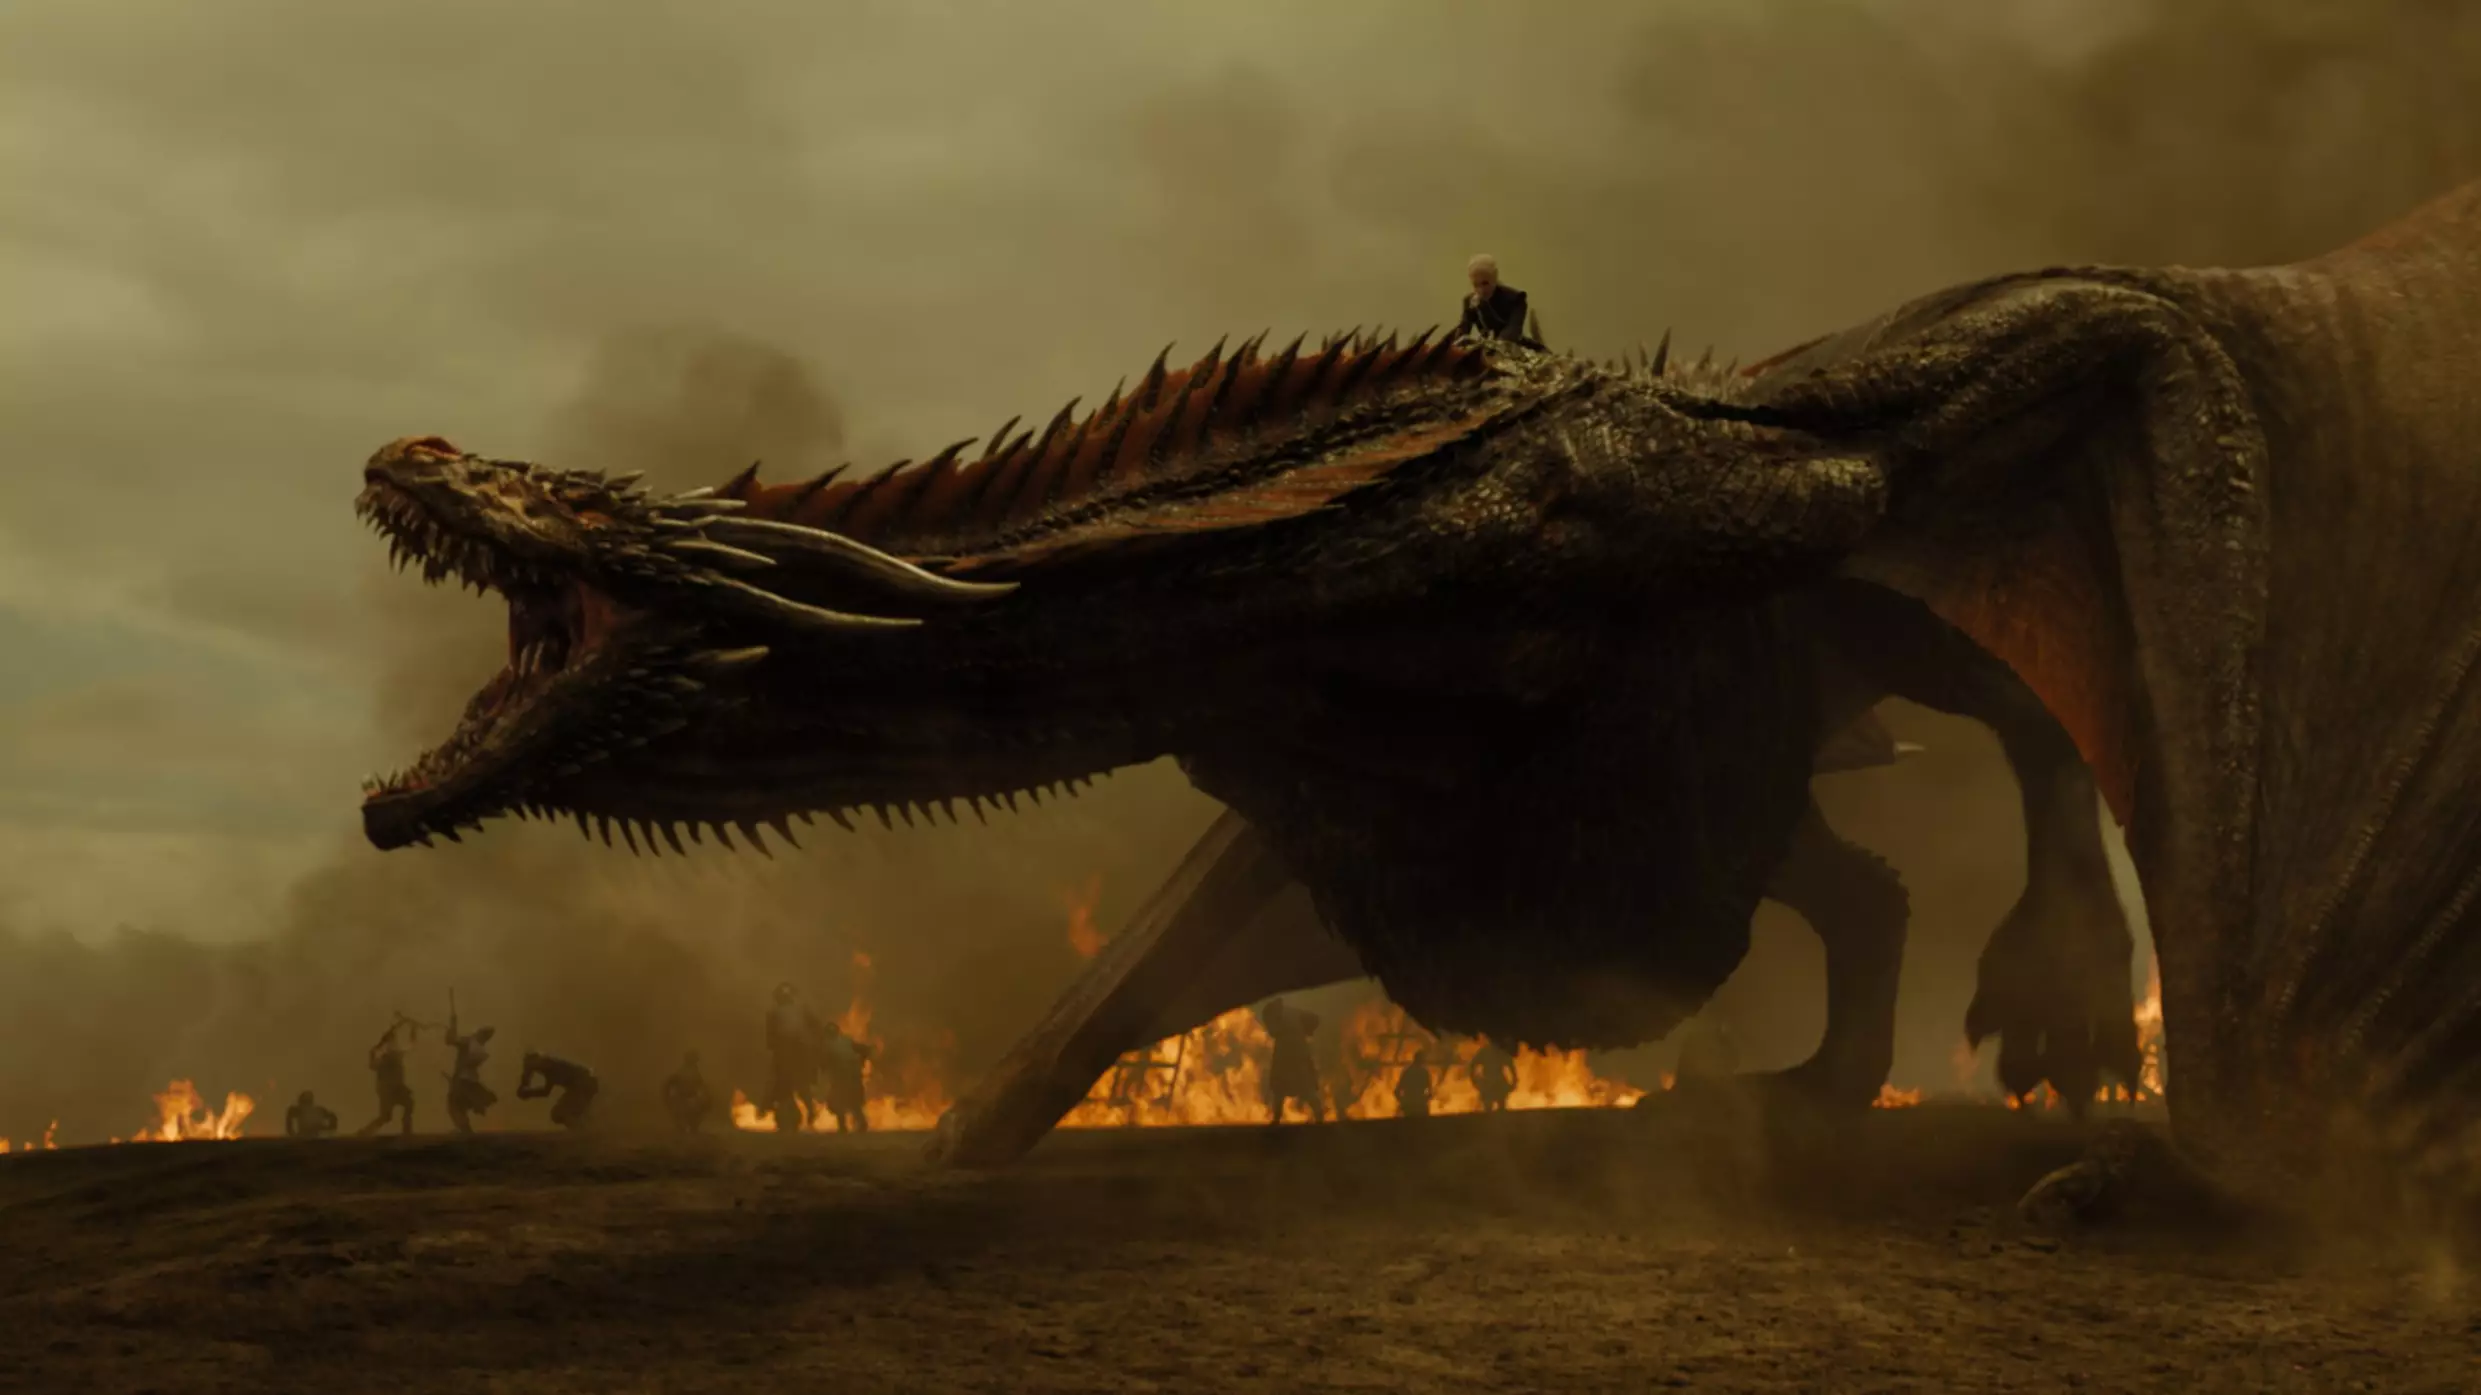 Game Of Thrones Targaryen Prequel Series Expected For 2022